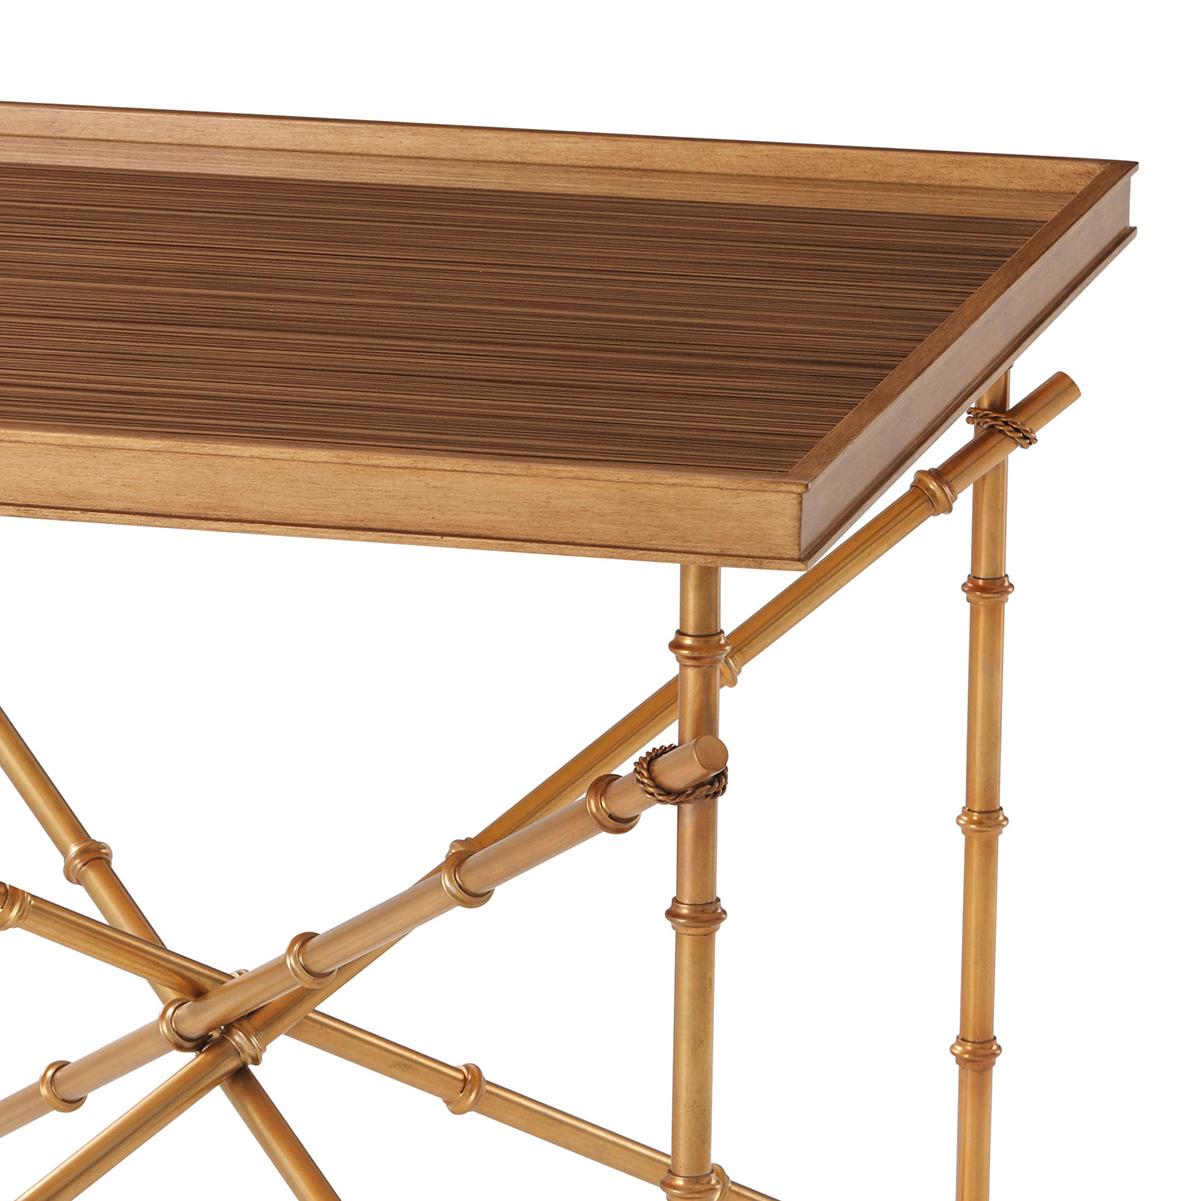 A work of art and beautiful accent table. The base is a network of faux bamboo cast in brass with brass strappings. The table top is veneered with glass overlay. An eglomise tray top completes the design. Organic and sophisticated.

Dimensions: 26